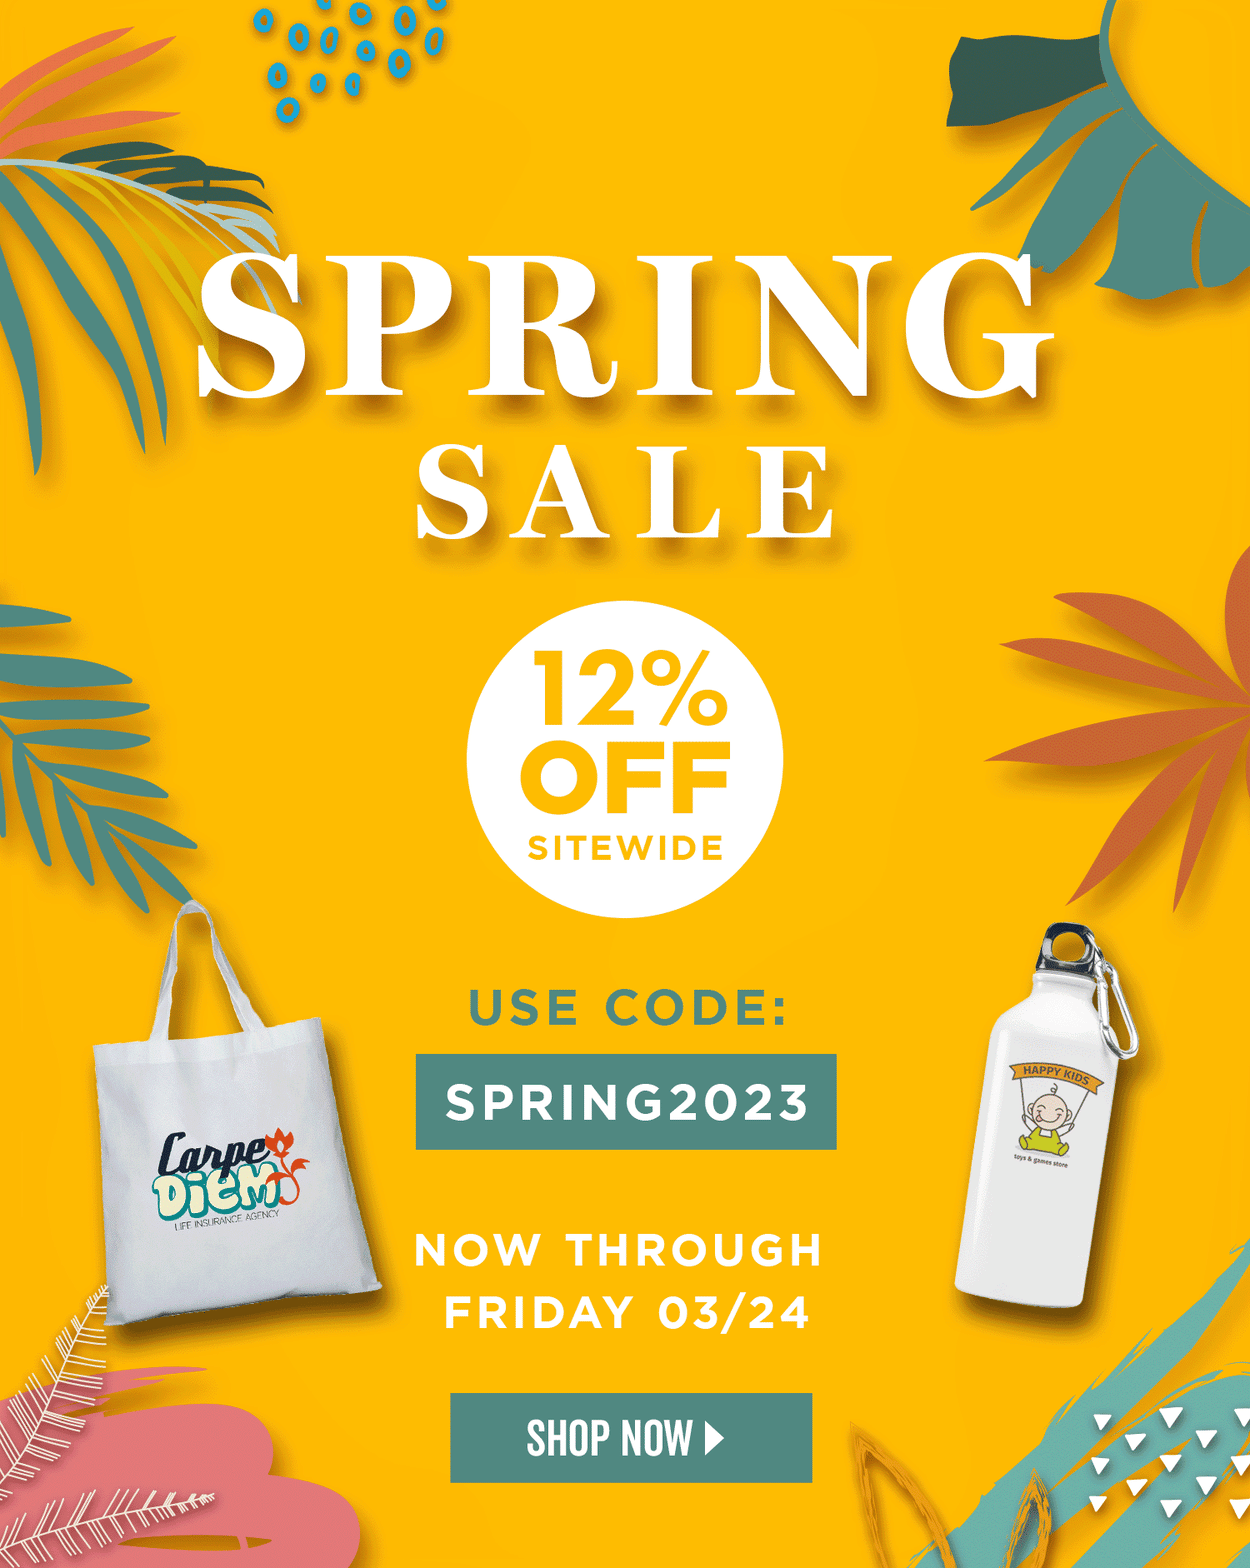 Spring Sale | 12% Off Sitewide | Use Code: SPRING2023 | Shop Now